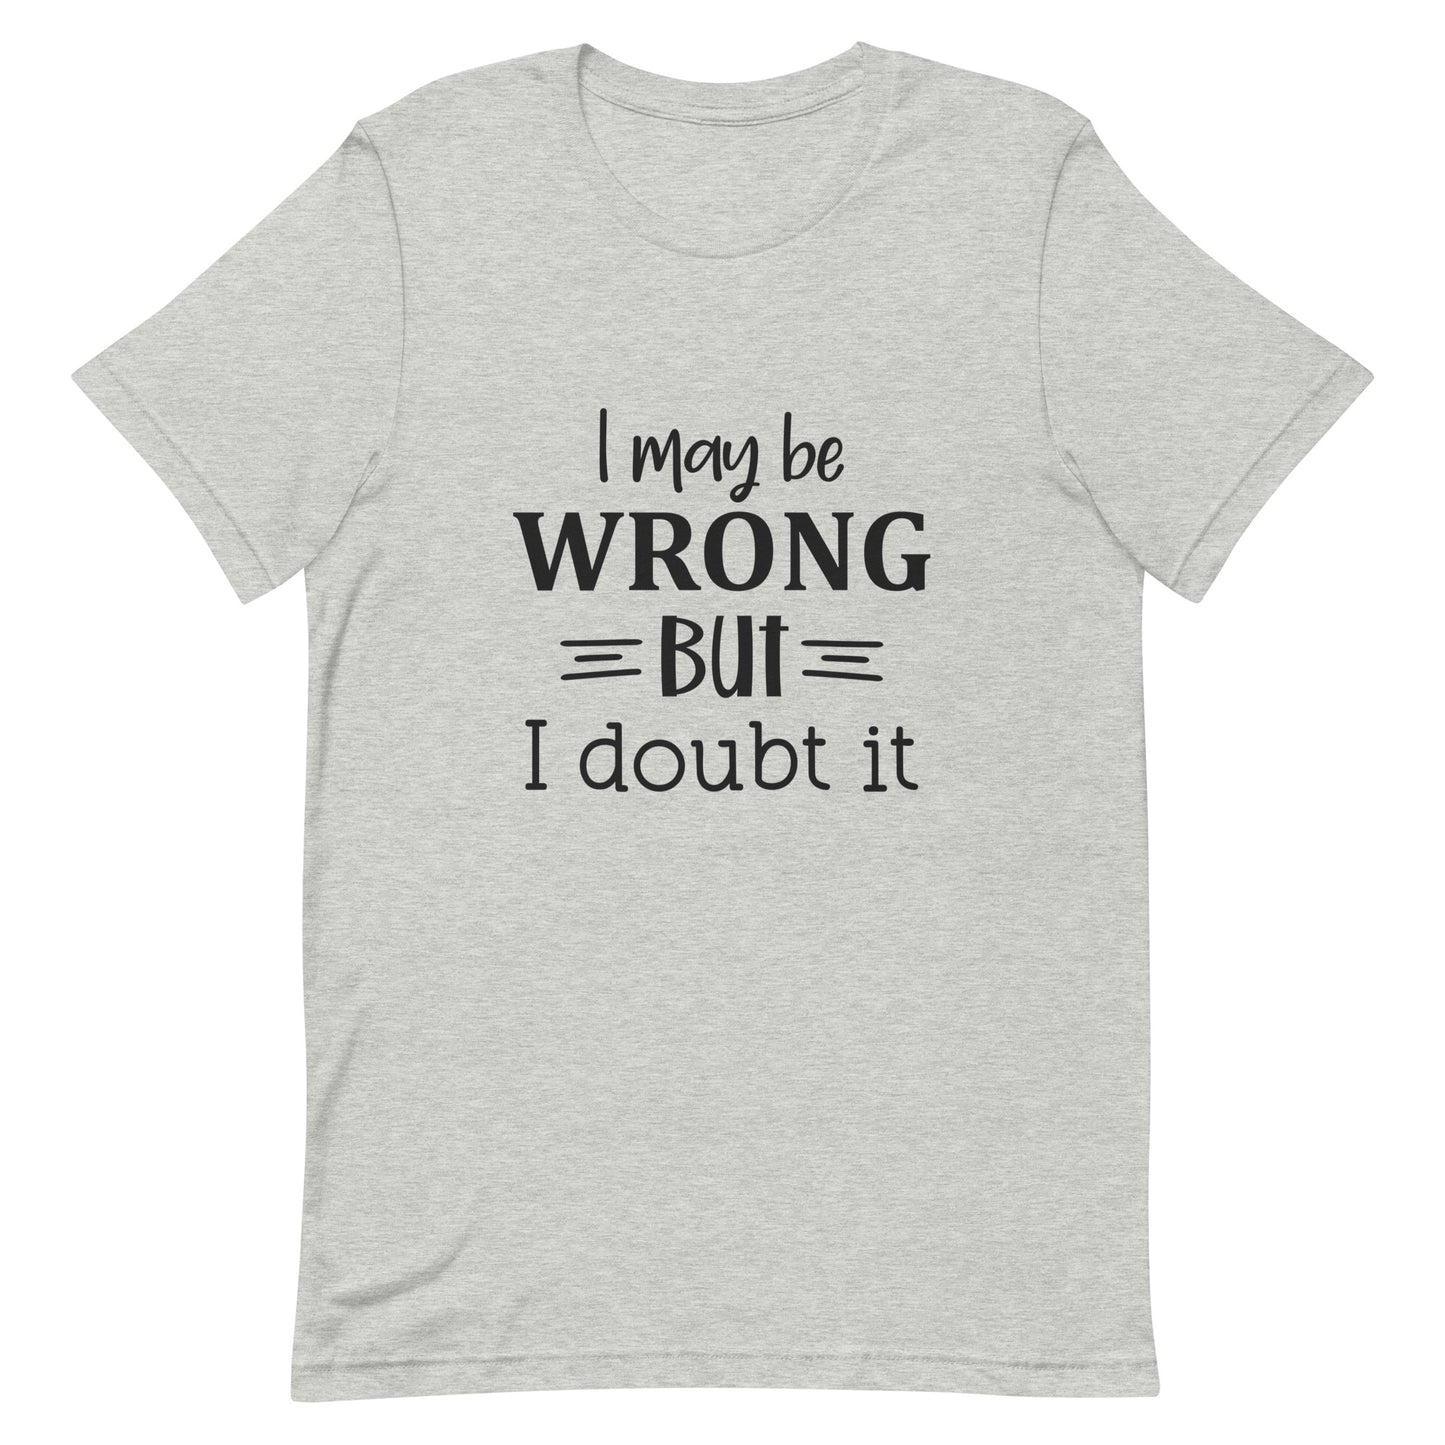 I May be Wrong But I Doubt It Unisex t-shirt